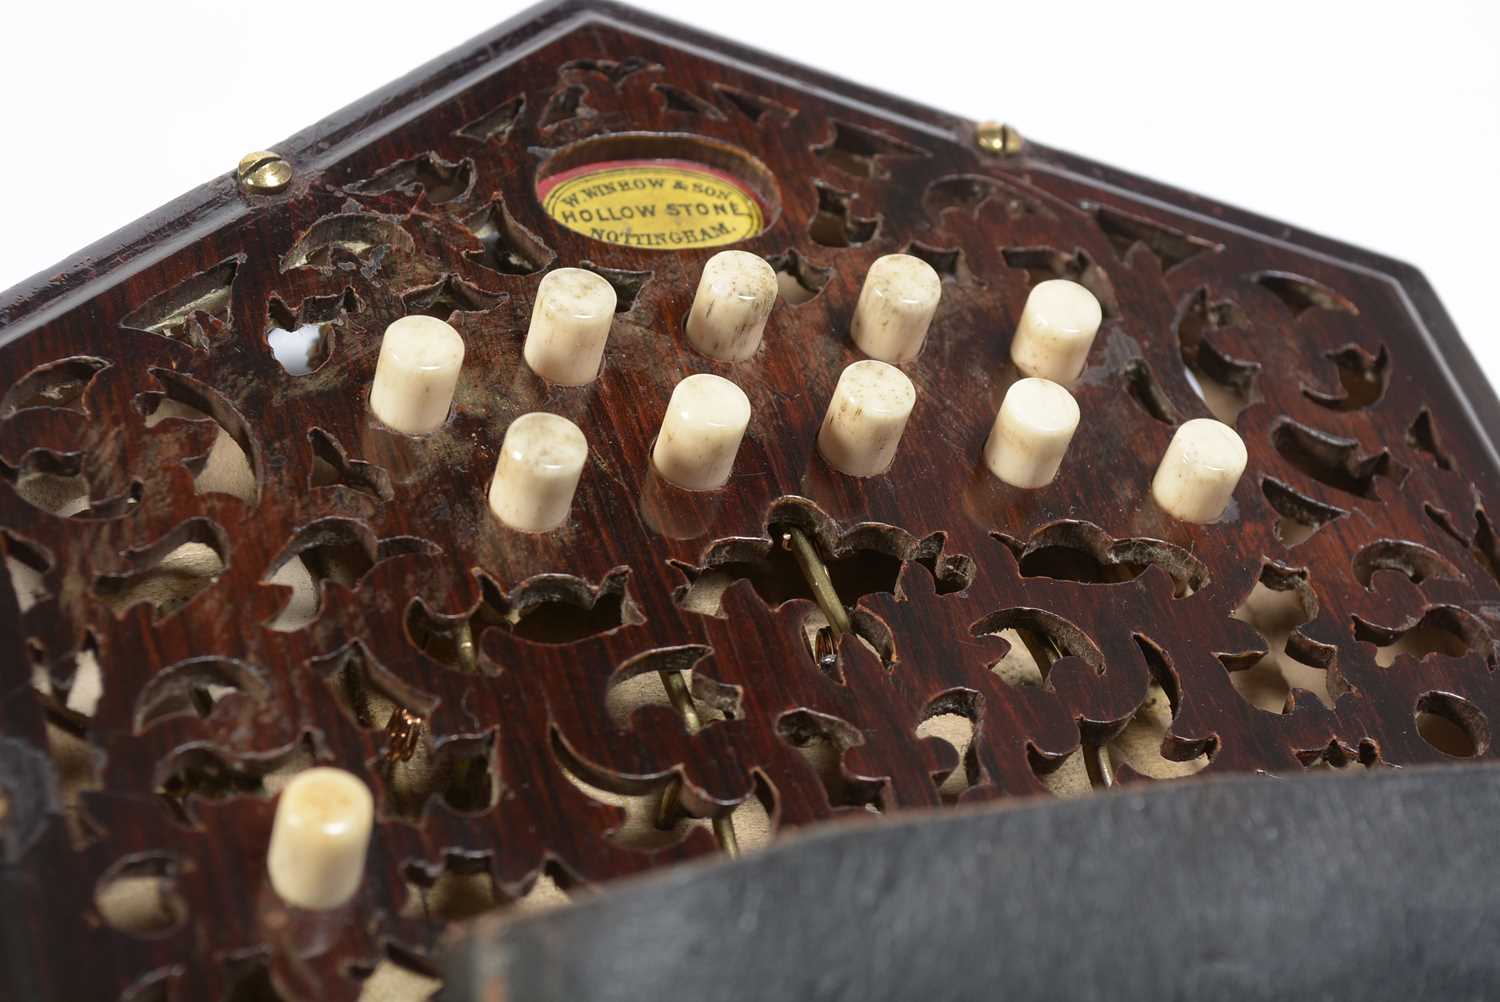 Lachenal 20 button Anglo system concertina - Image 8 of 14